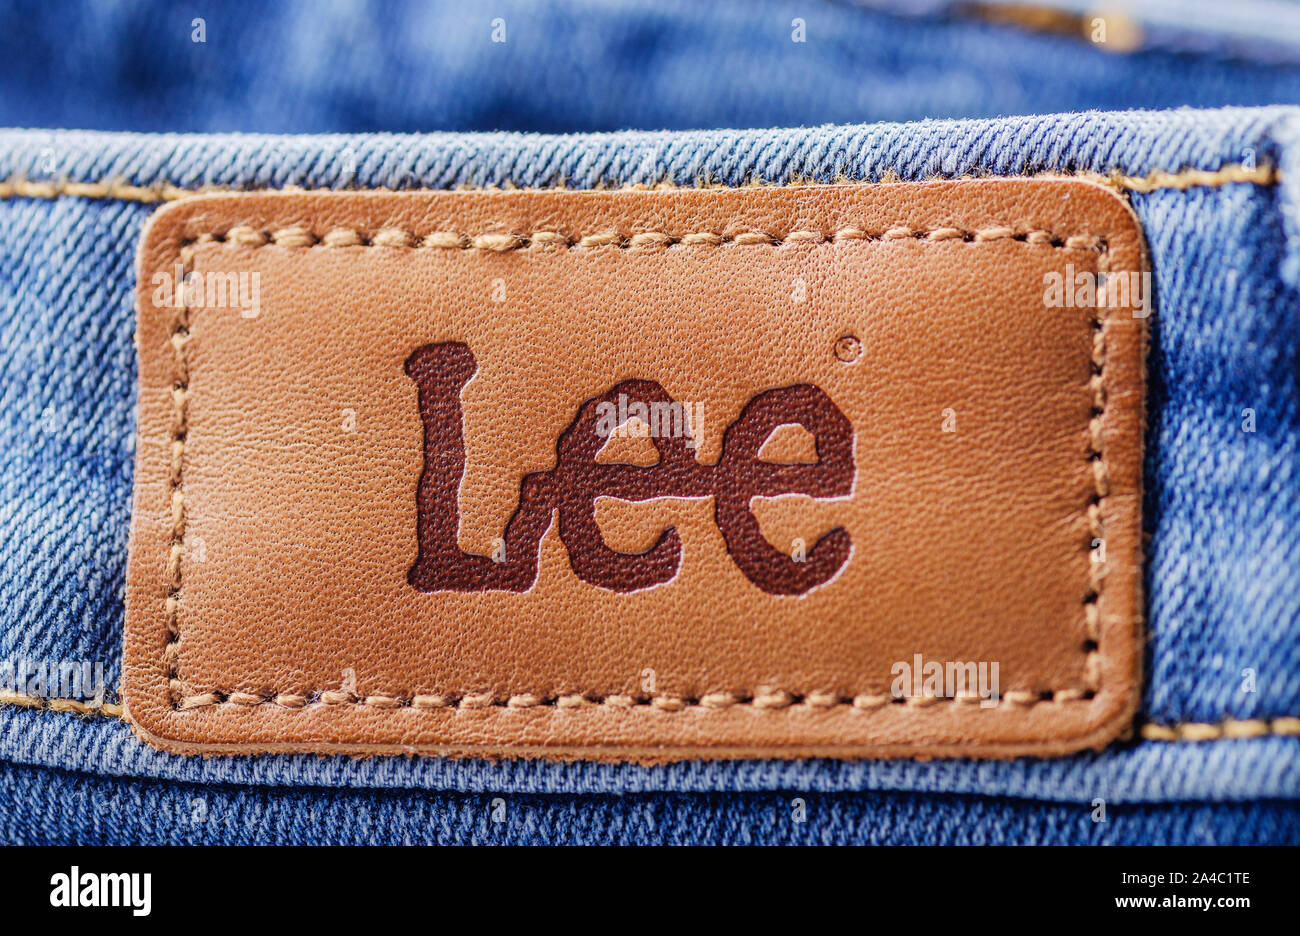 Closeup of Lee label on clothes Stock Photo - Alamy